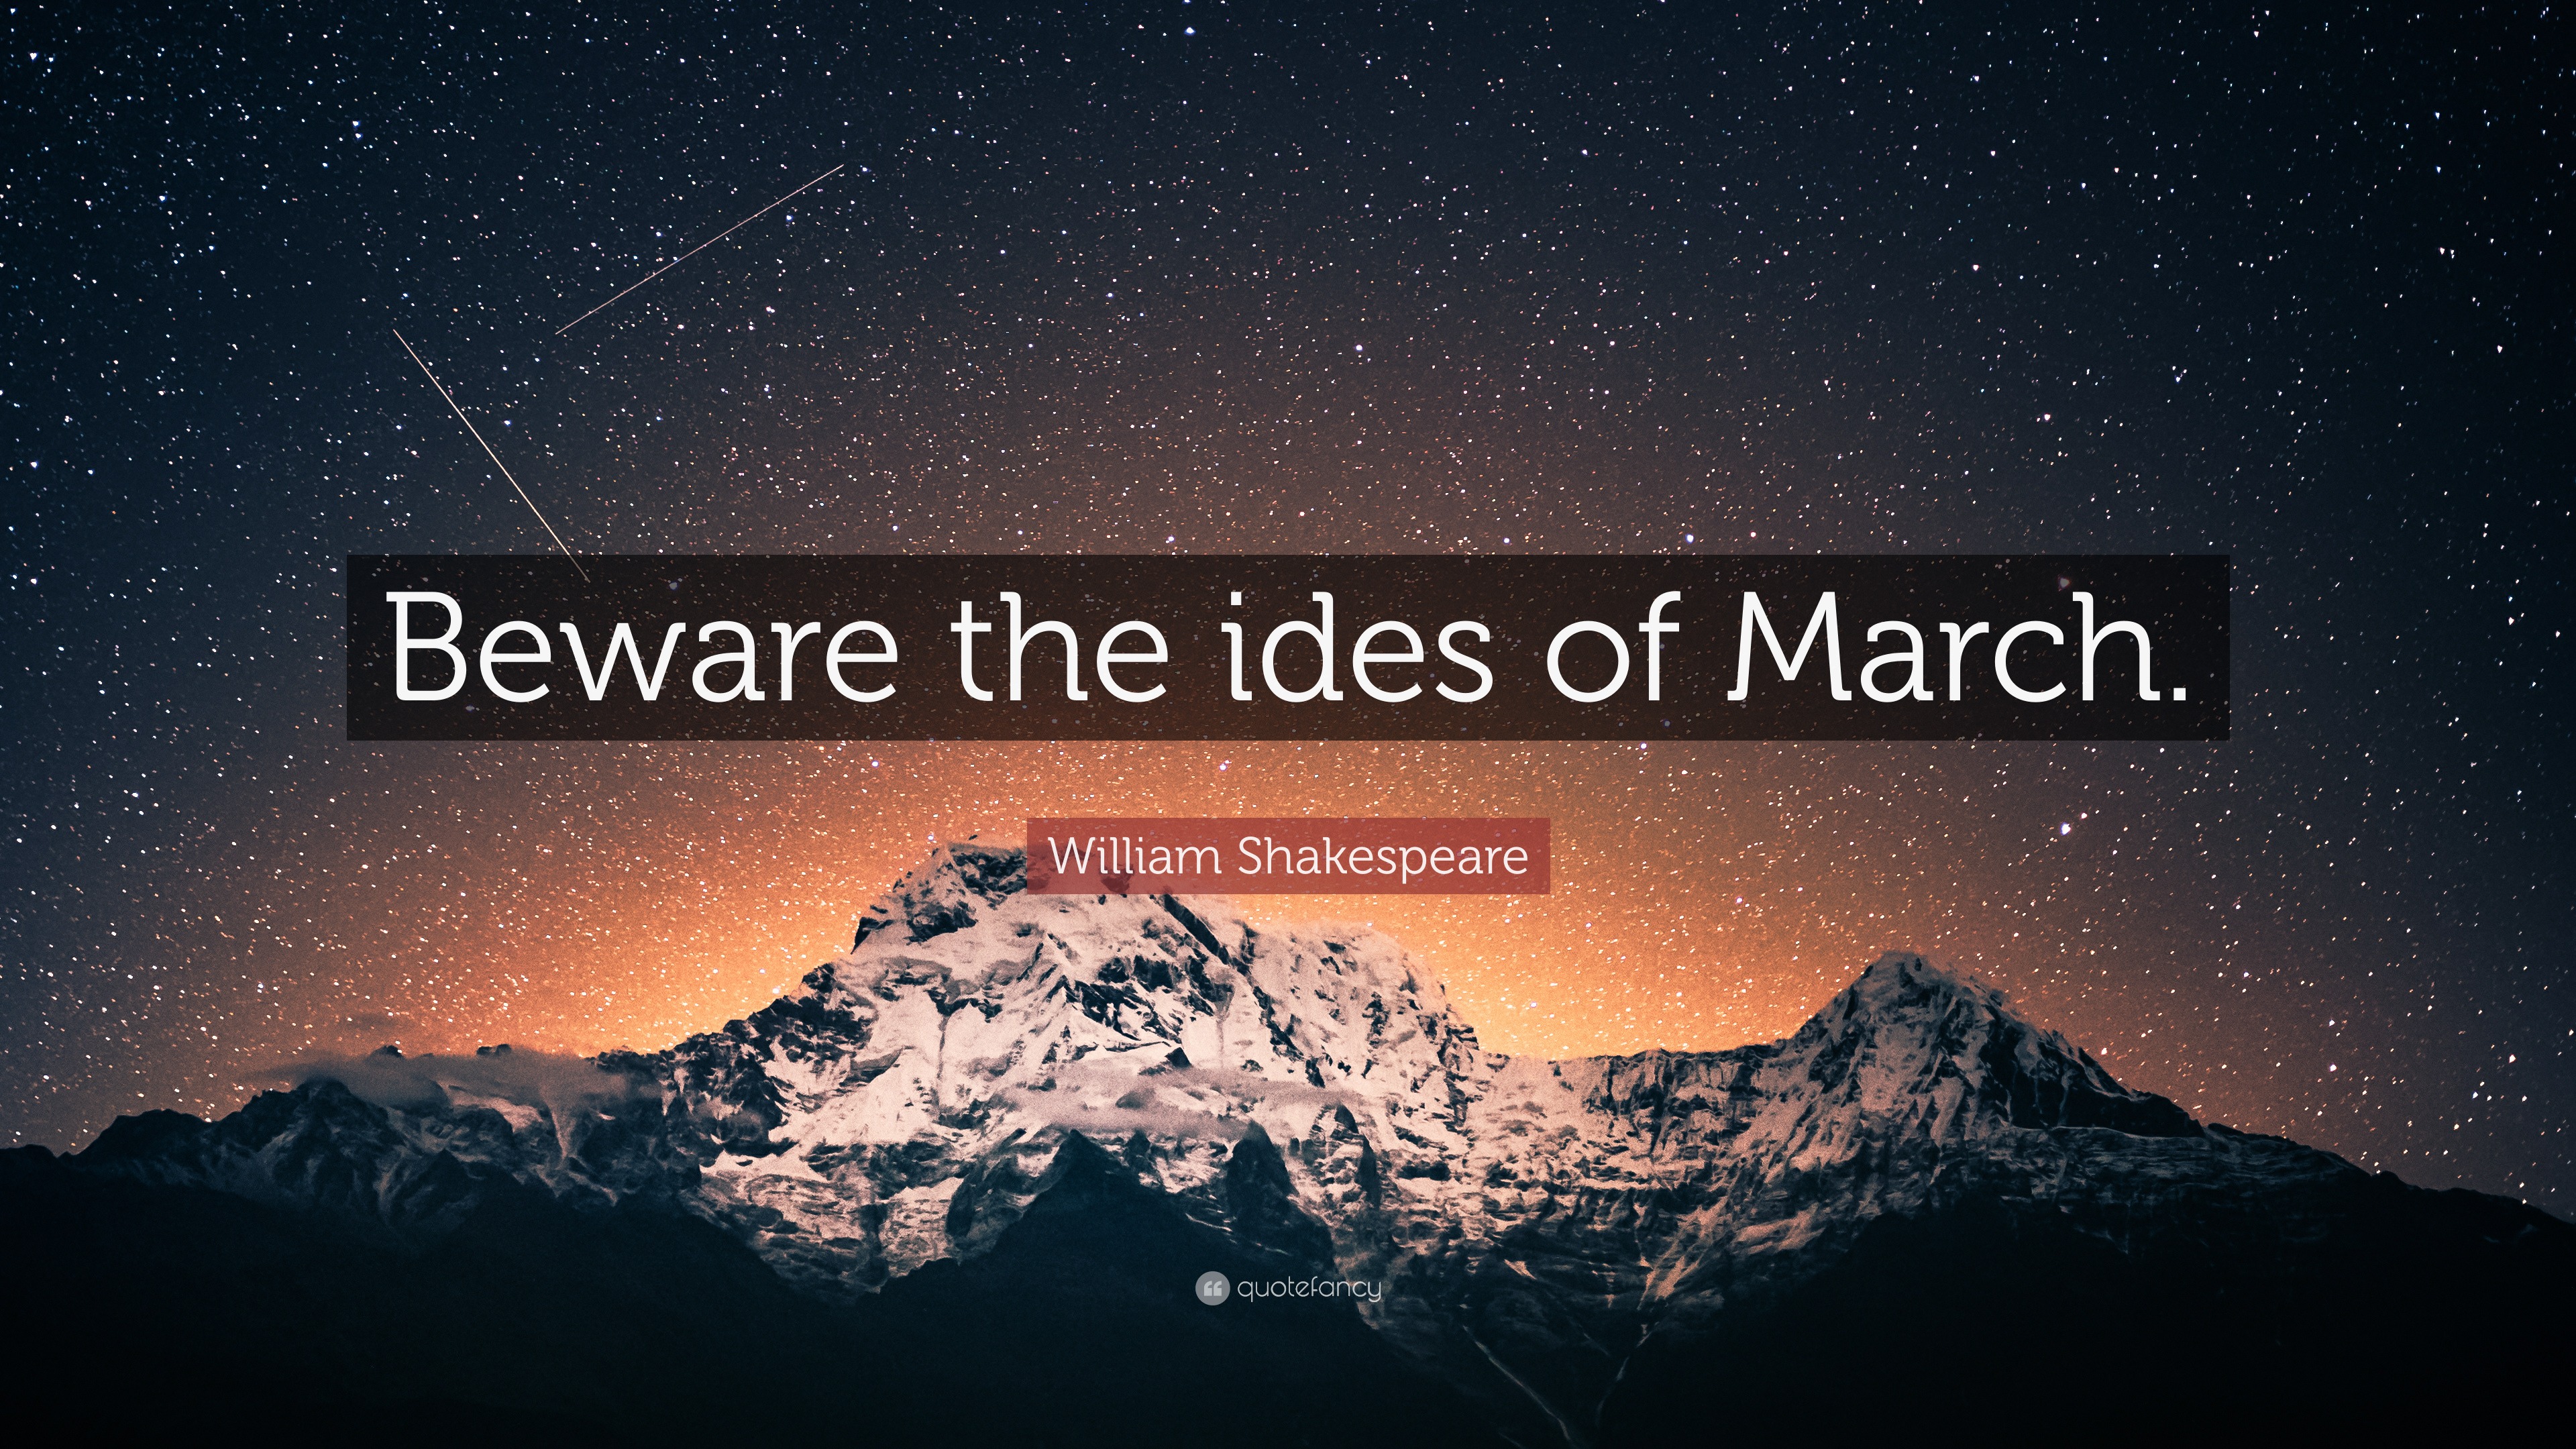 William Shakespeare Quote “Beware the ides of March.”